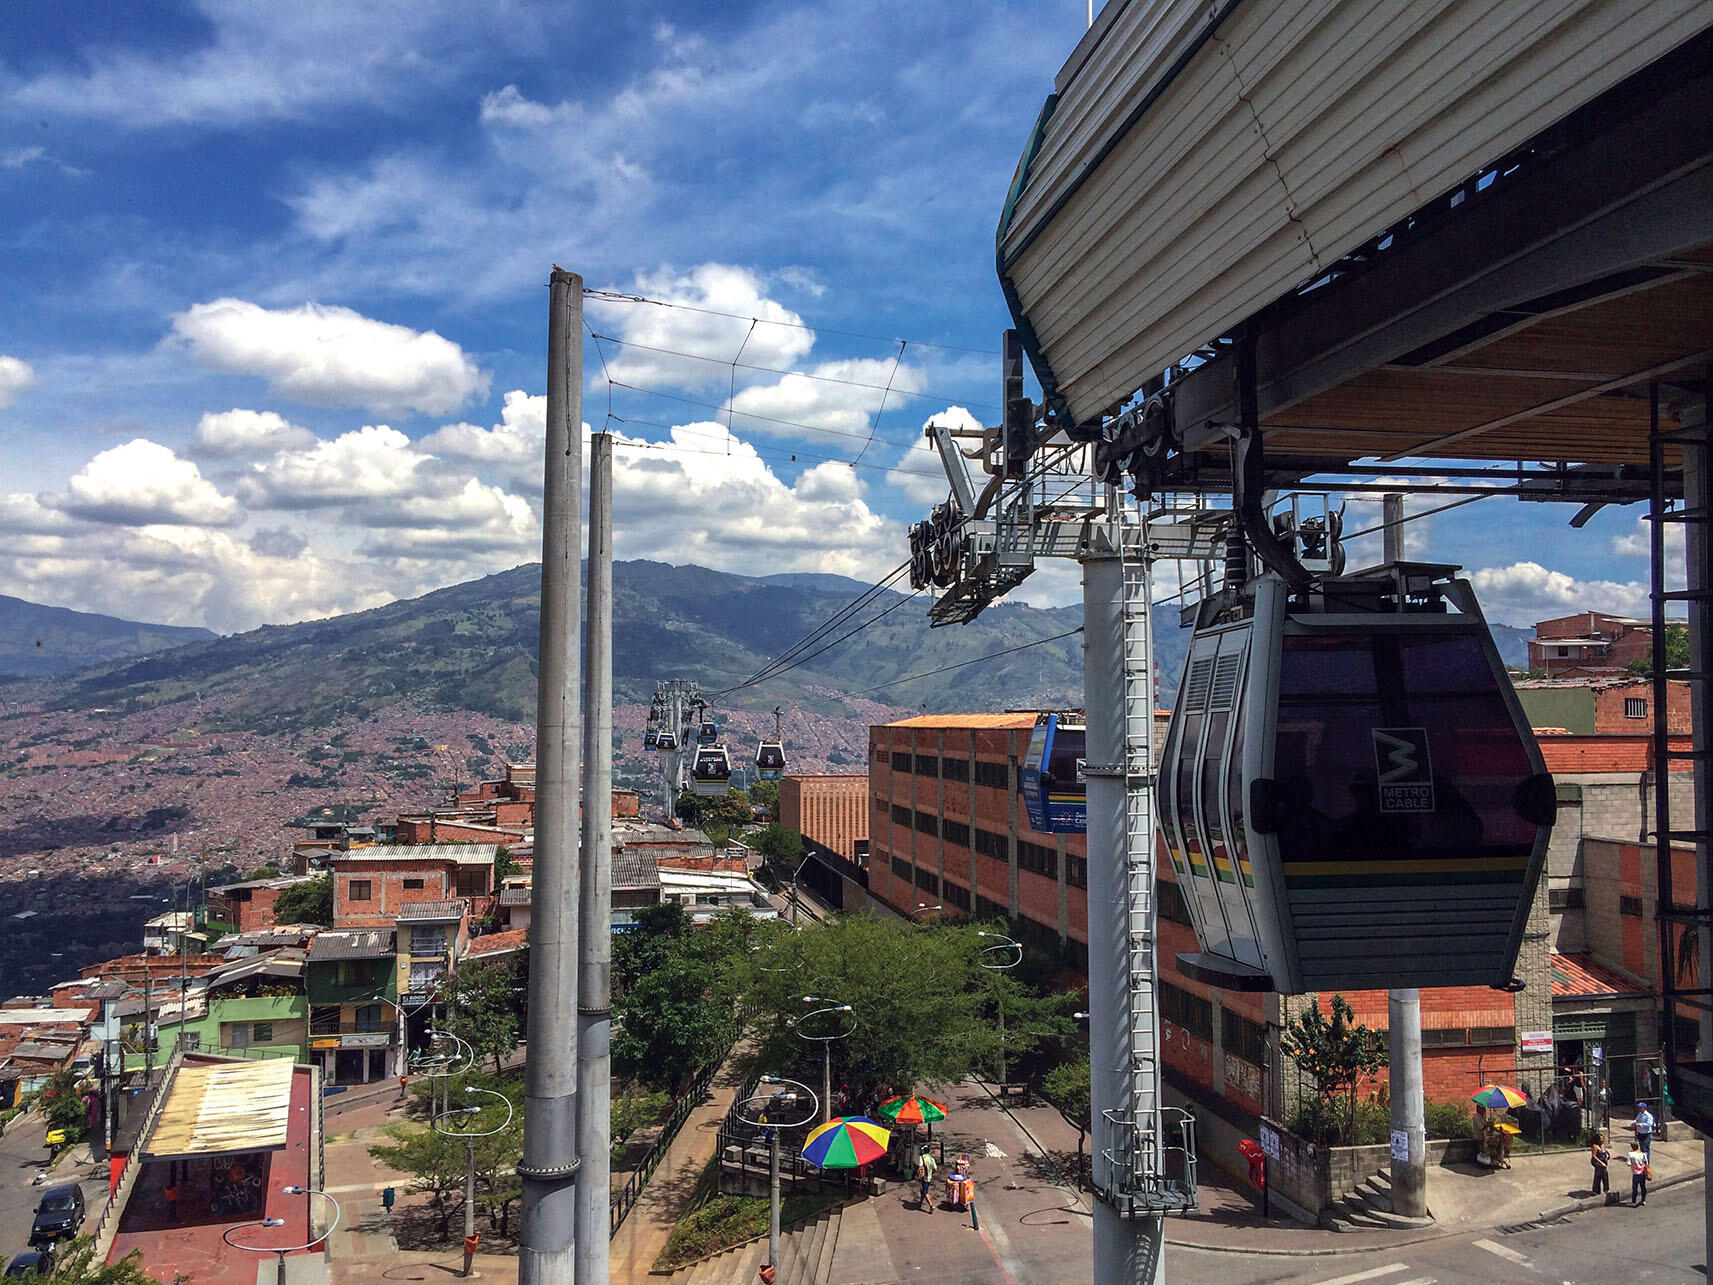 The tramway and a station of Medellín’s Metrocable, which links poor hillside communities with the urban center. (Photo by Alan.)